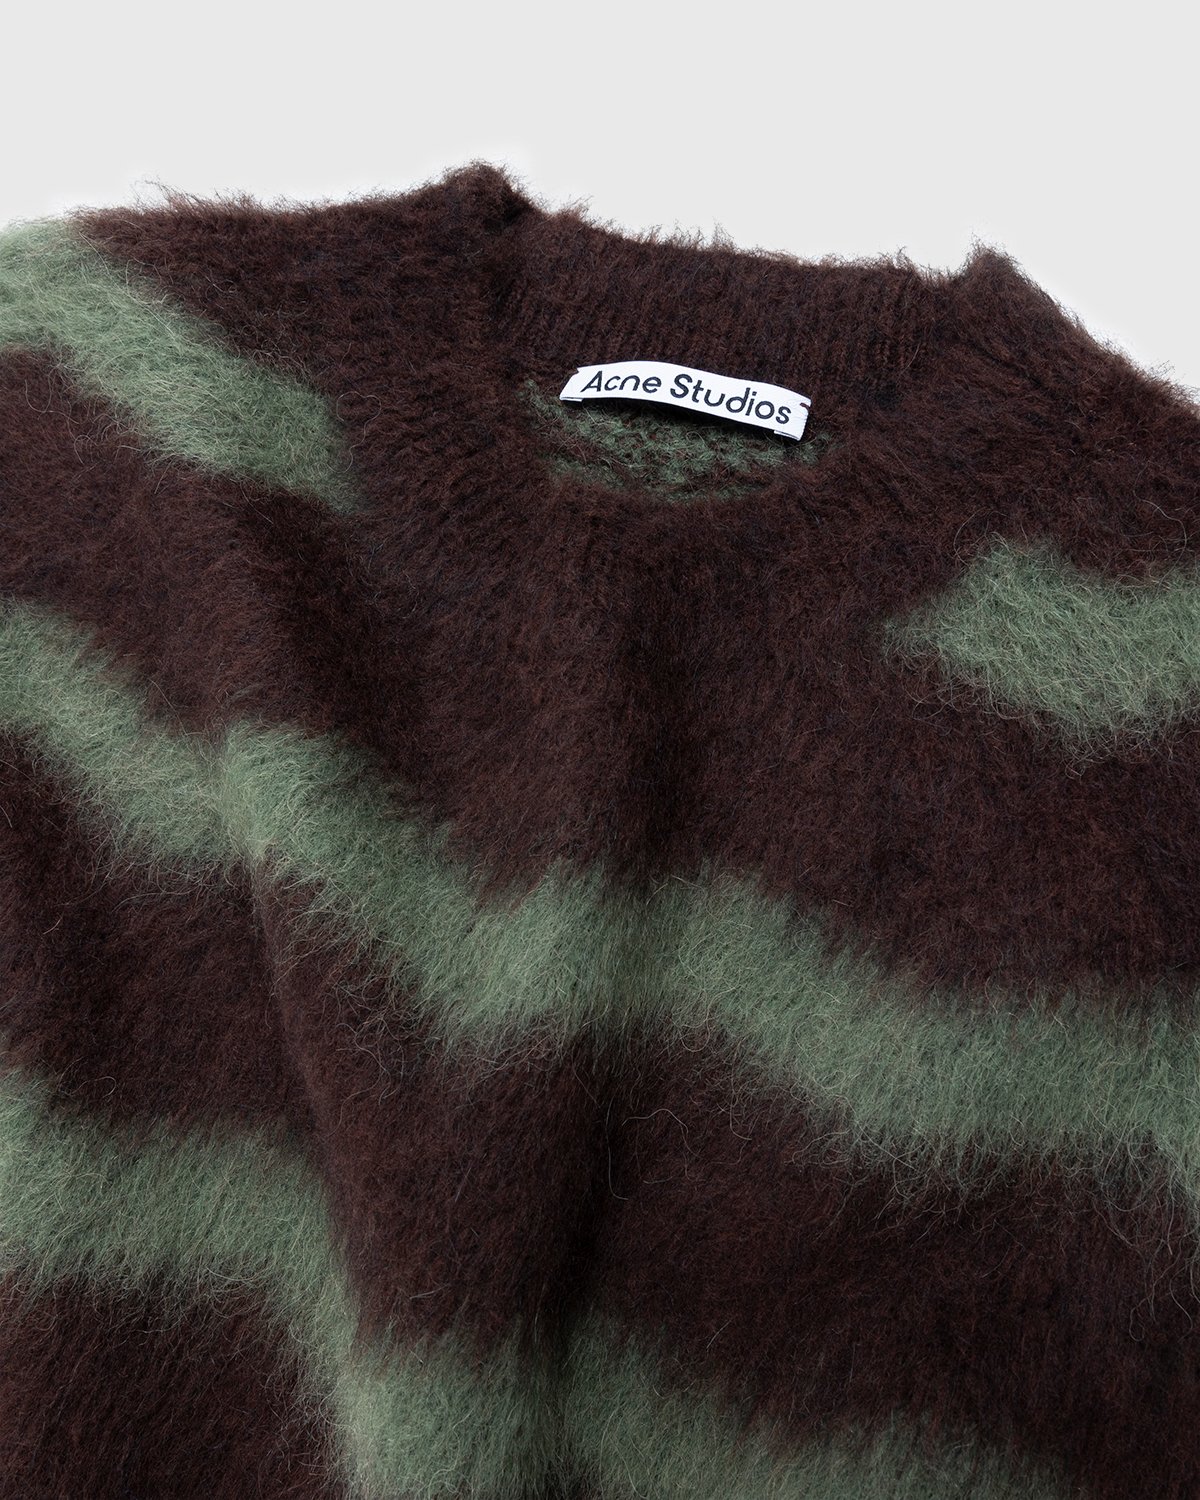 Acne Studios - Striped Fuzzy Sweater Brown/Military Green - Clothing - Brown - Image 3